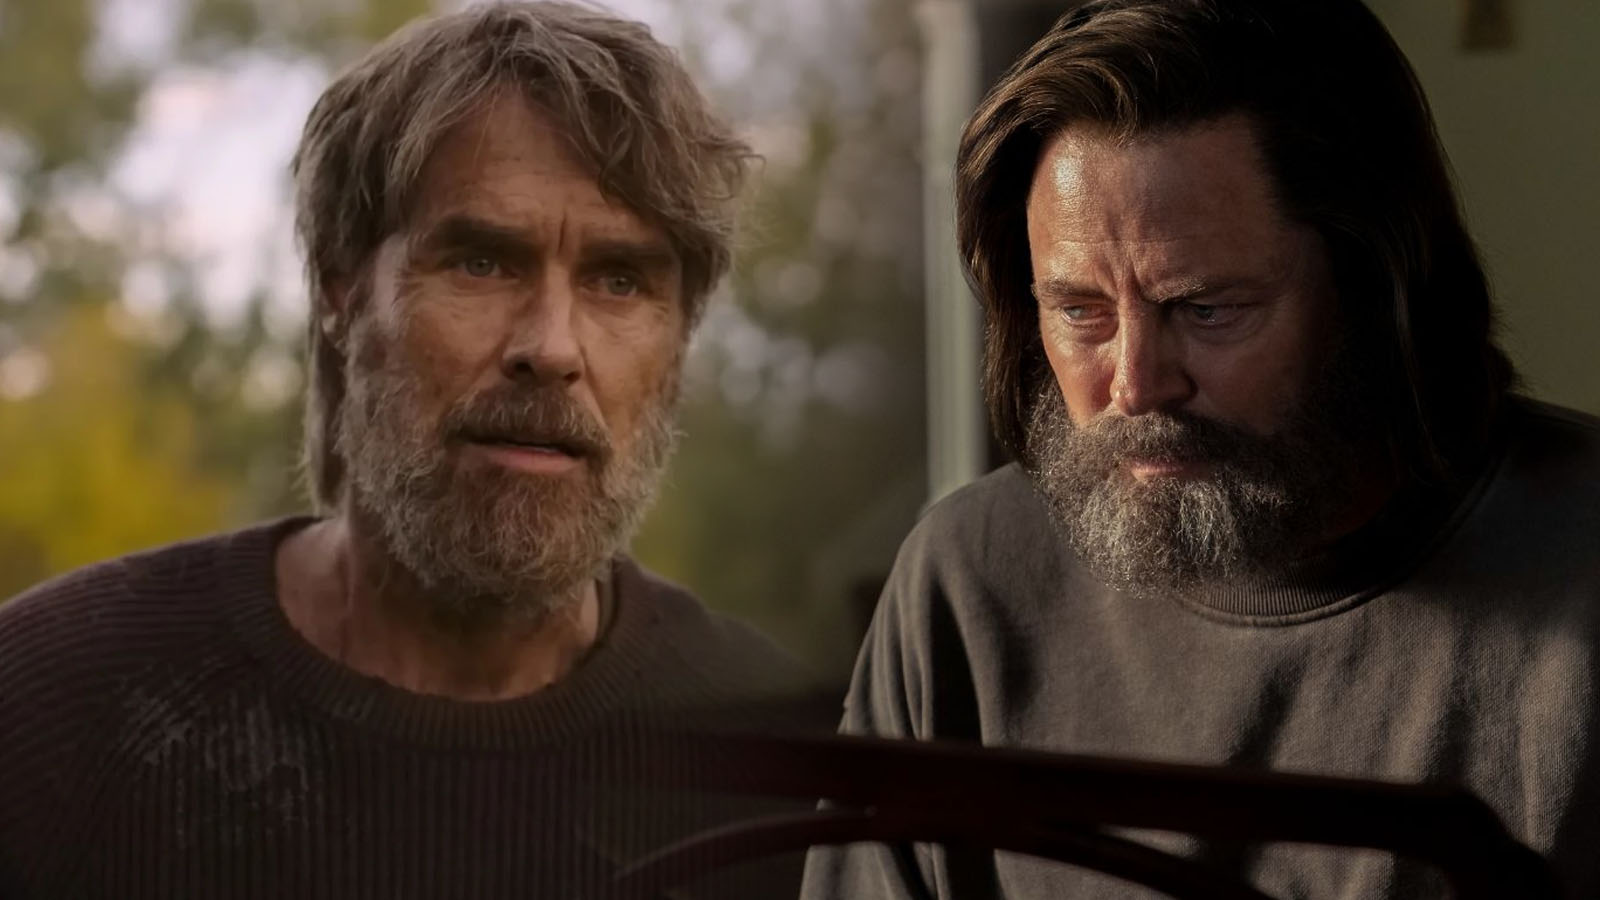 The Last of Us' Episode 3 Preview Teases Nick Offerman as Bill, Murray  Bartlett as Frank